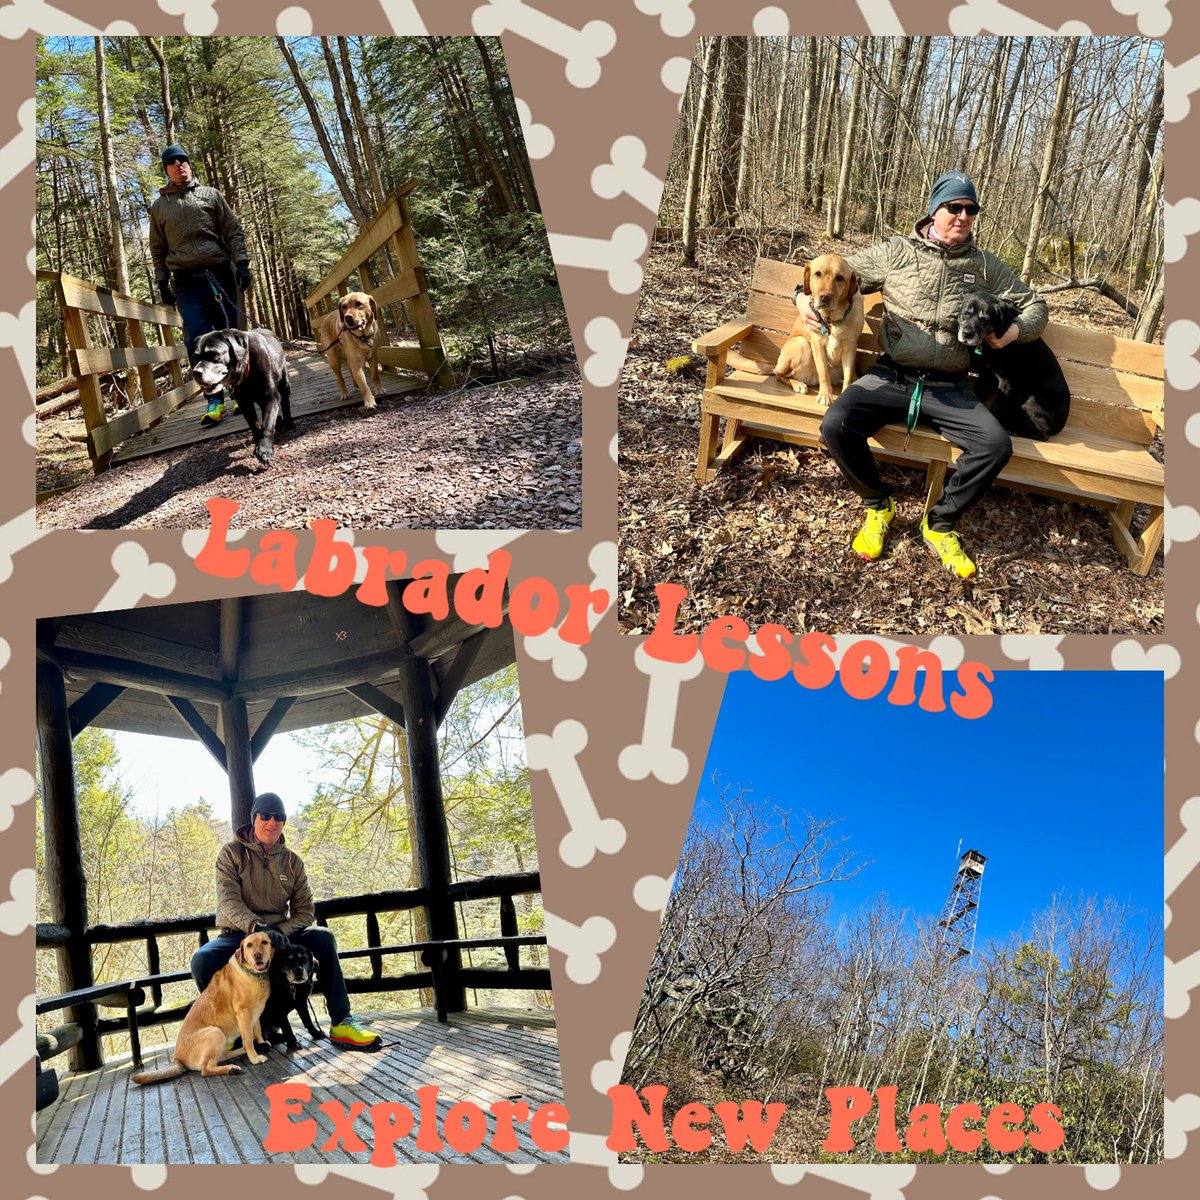 #LabradorLesson from #FitLabPGH (link below): be consistent with your movement practice & keep it interesting by exploring new places to move!

#WiseWords #SpringIsHere #GetOutside #ExploreMore #MoveMore #AdventureAwaits #Spring2024 #TrailDogs 

tinyurl.com/FLP-LabsExplore